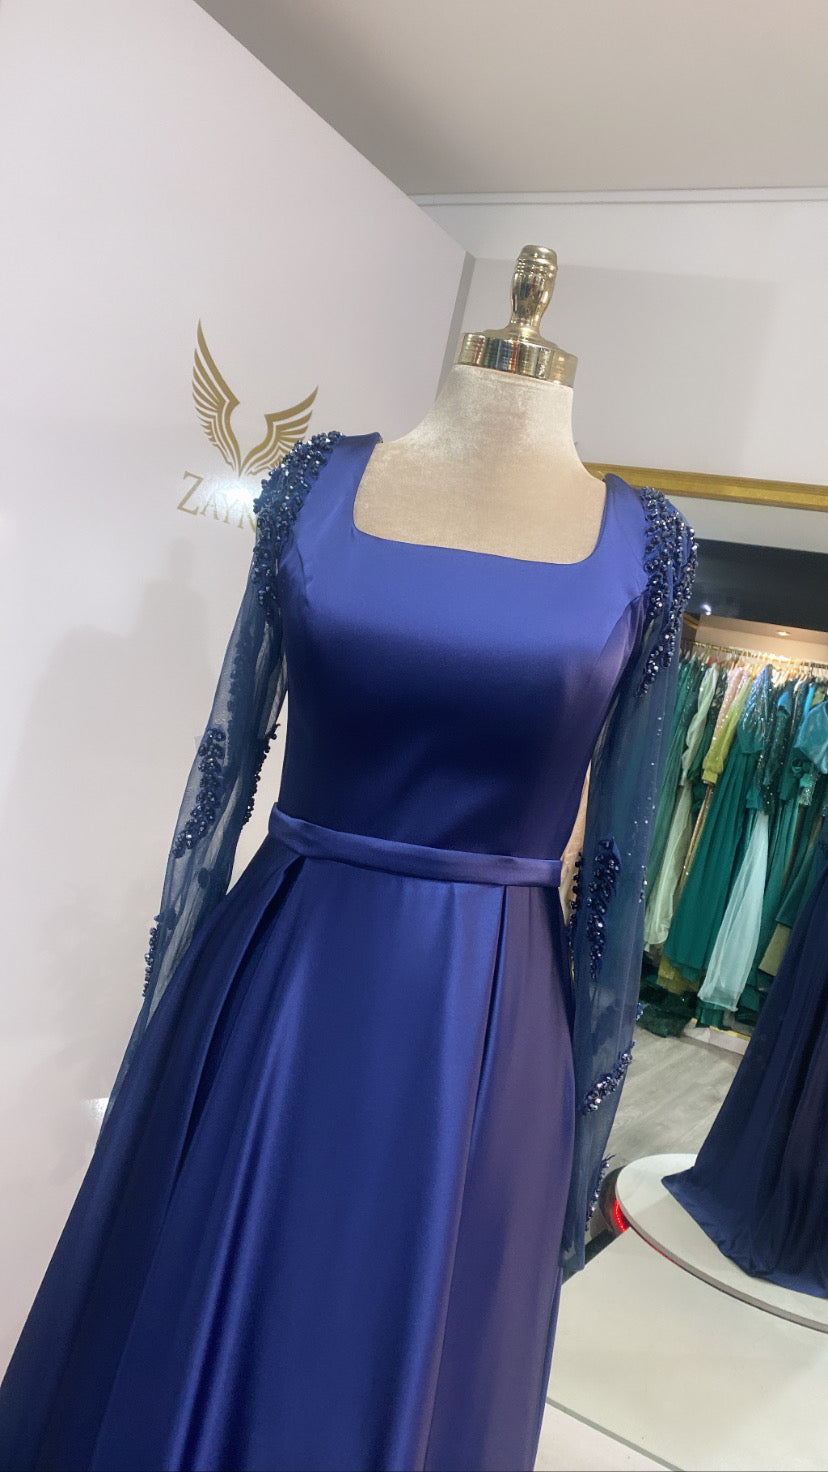 Elegant blue dress satin, decorated with beads